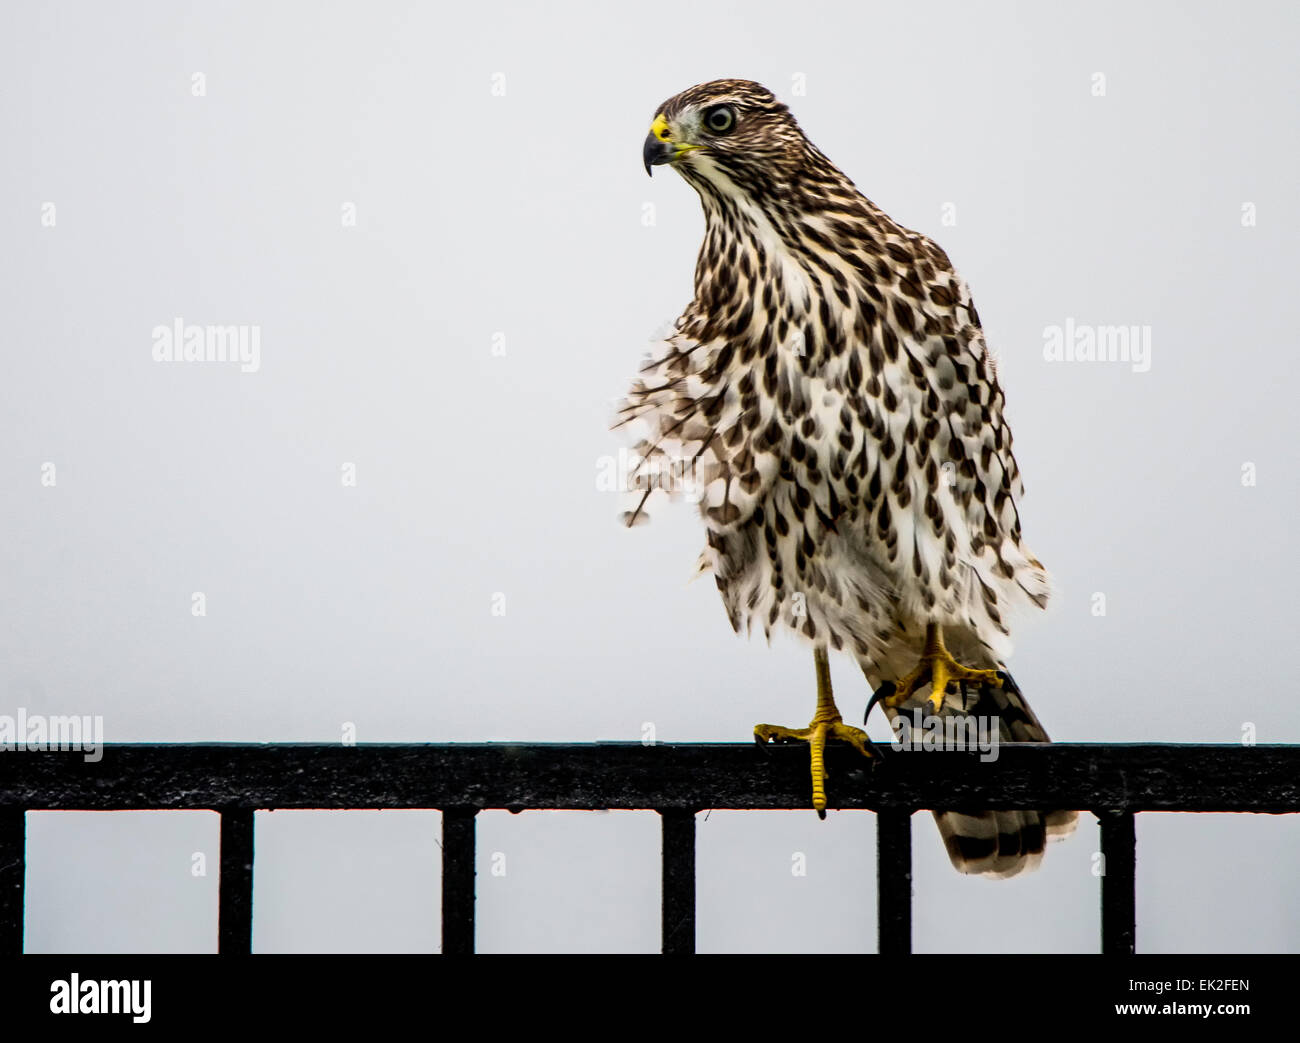 Cooper's hawk (Accipiter cooperii) perched on a backyard fence in the city. Stock Photo